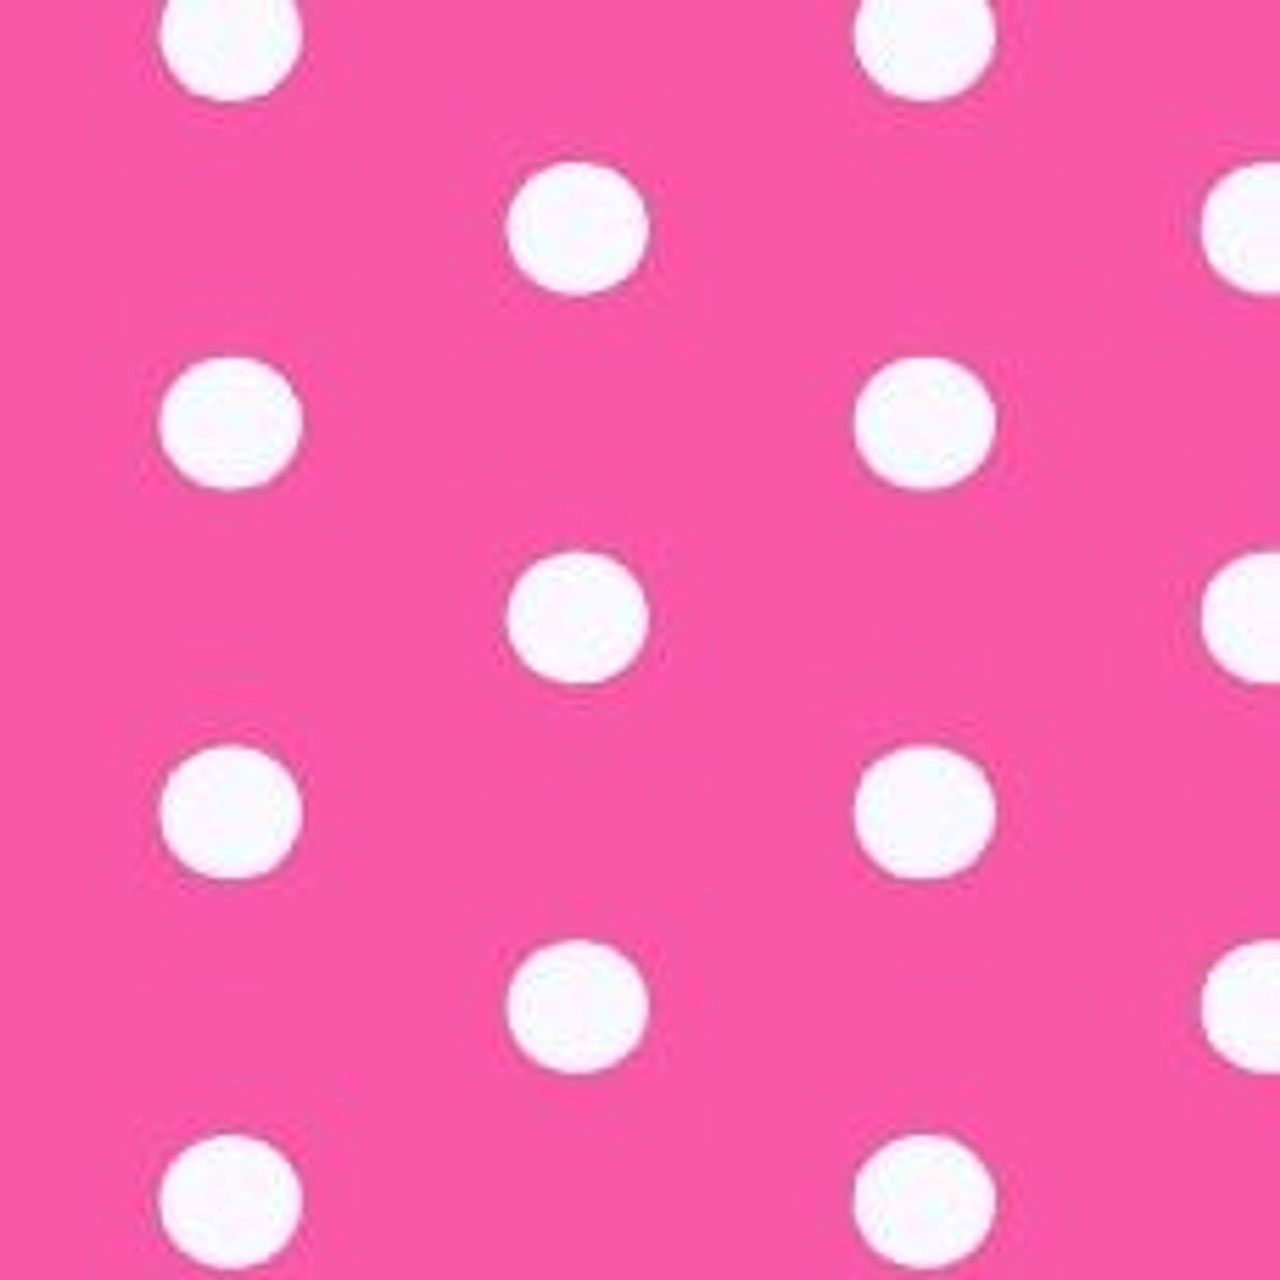 Pink Dots Wallpapers 4k Hd Pink Dots Backgrounds On Wallpaperbat